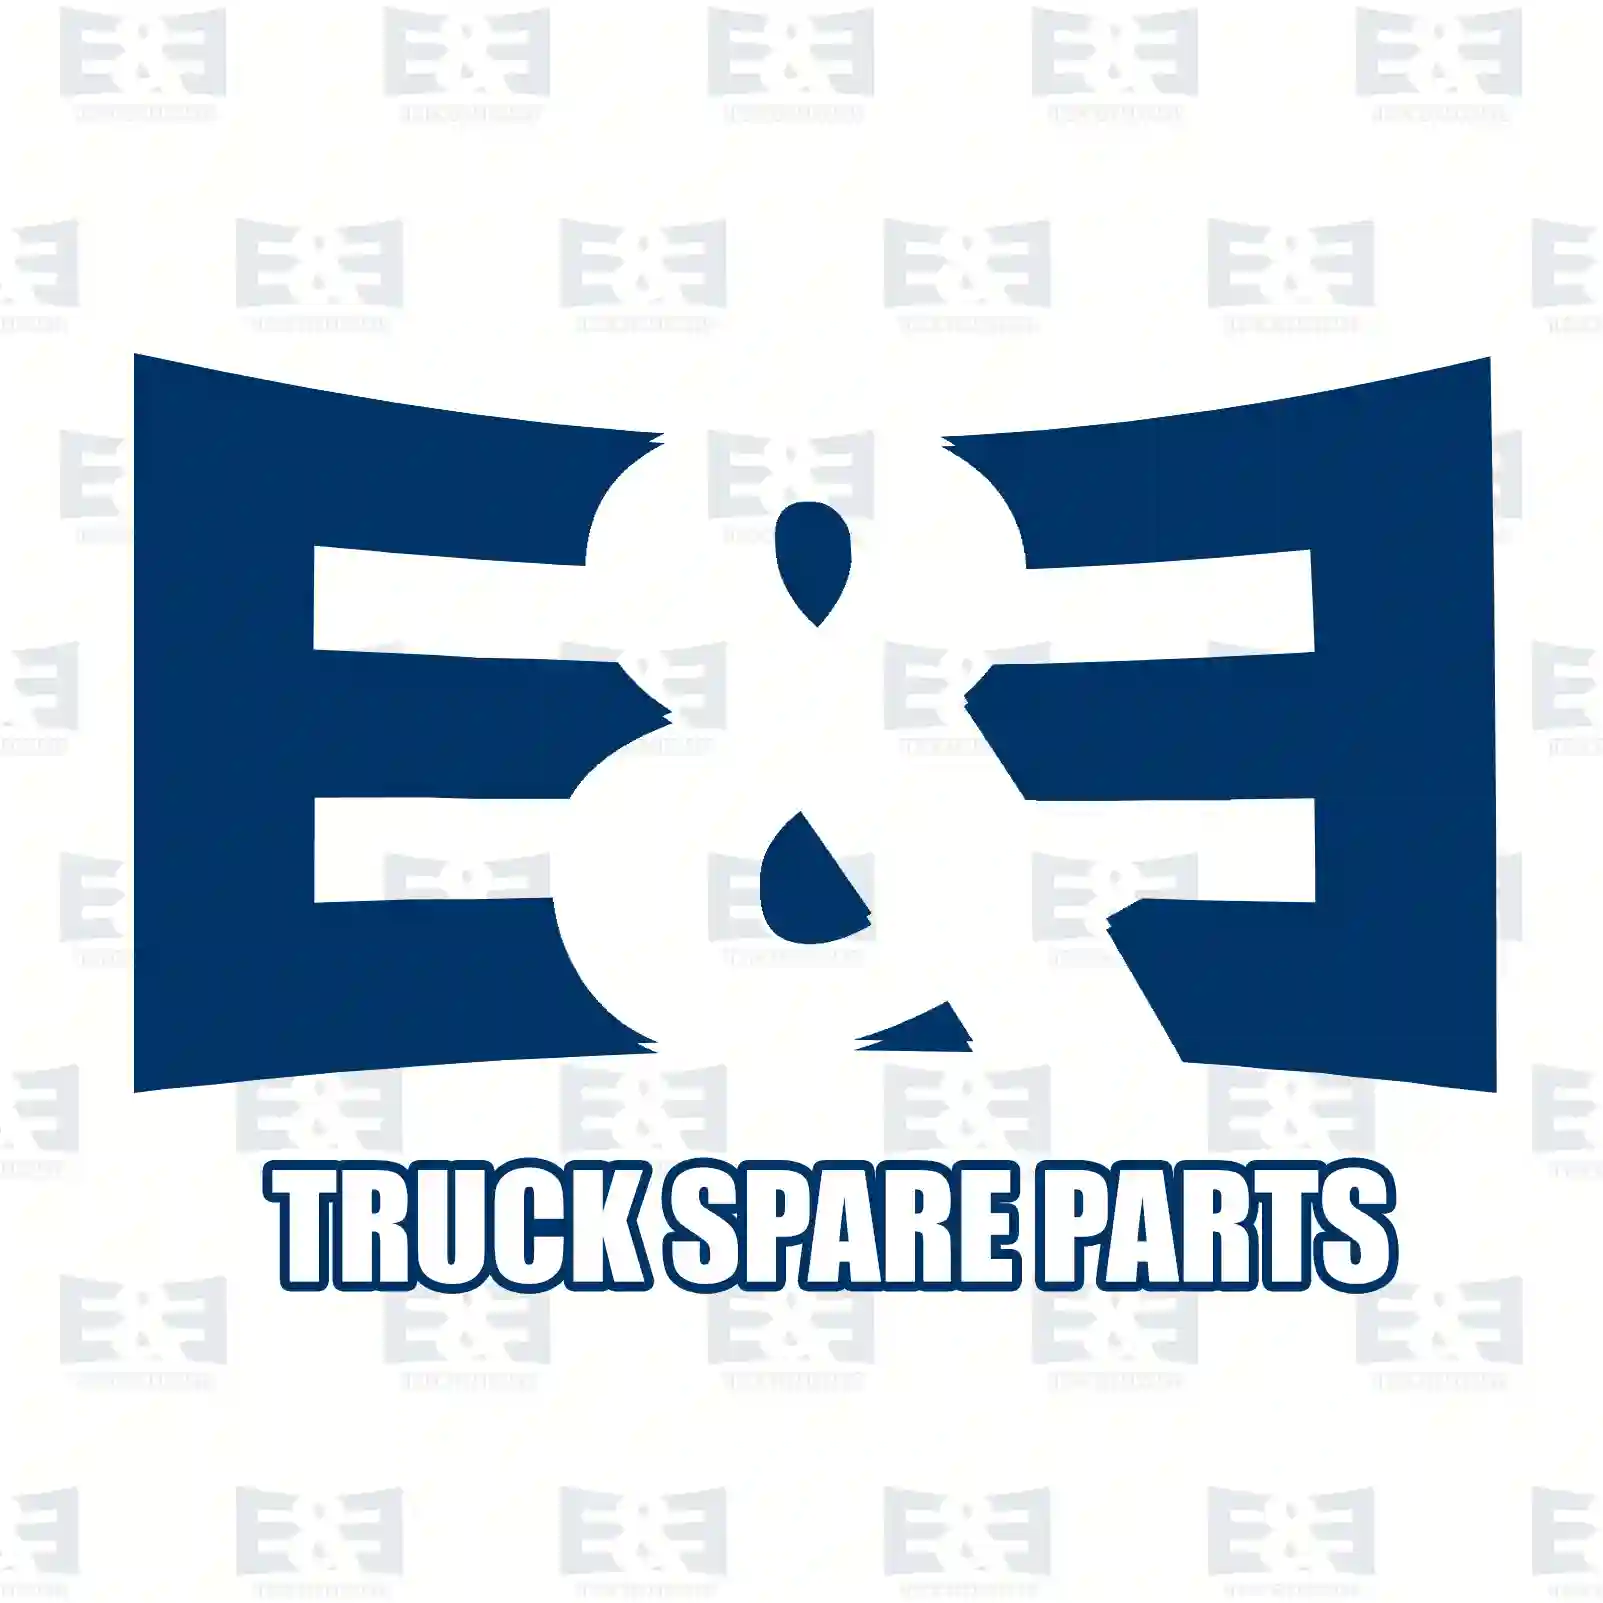  Window regulator, electrical, left, with motor || E&E Truck Spare Parts | Truck Spare Parts, Auotomotive Spare Parts